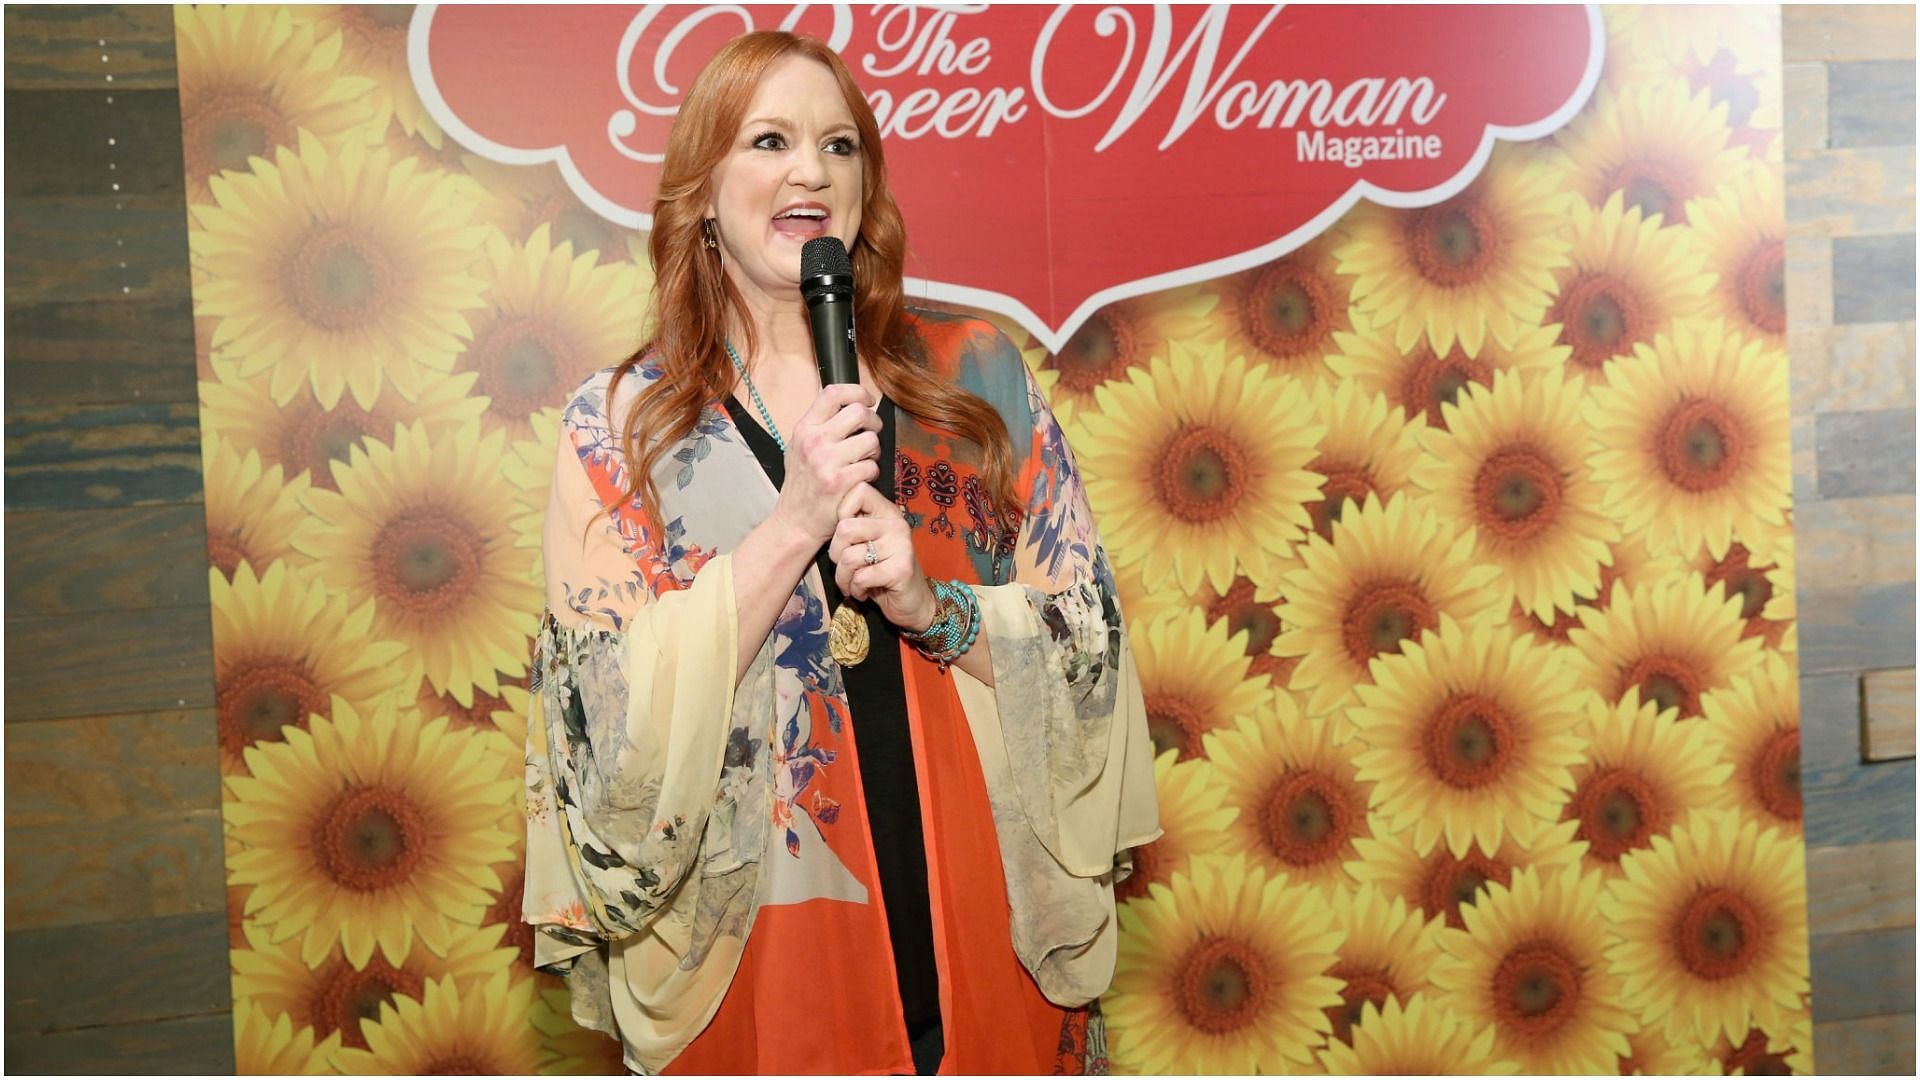 Ree Drummond speaks during The Pioneer Woman Magazine Celebration with Ree Drummond at The Mason Jar (Image by Monica Schipper via Getty Images)